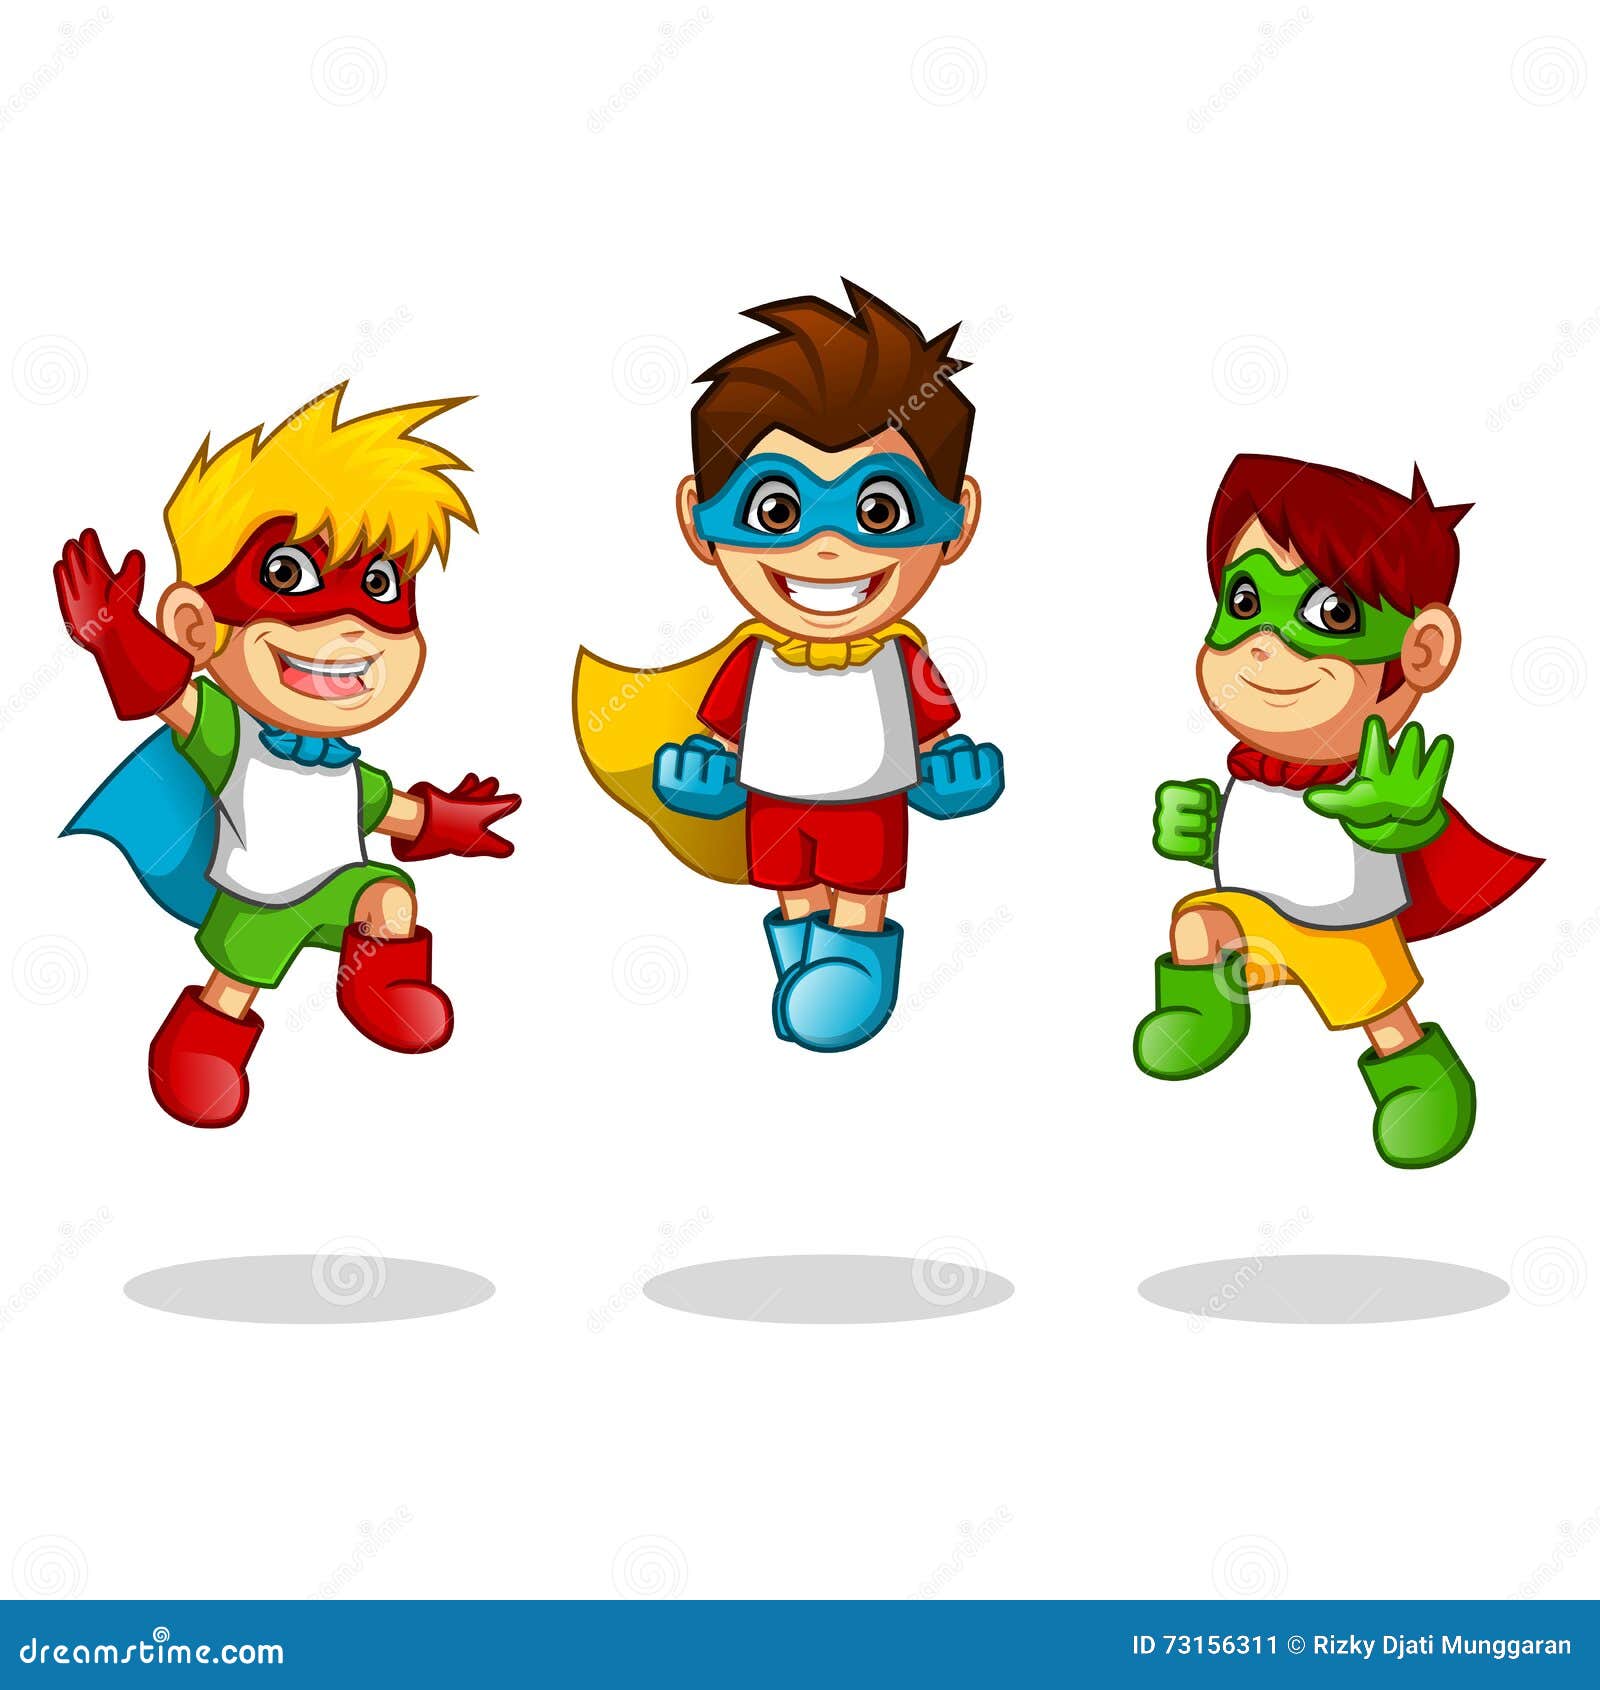 kid super heroes with jumping flying pose cartoon character